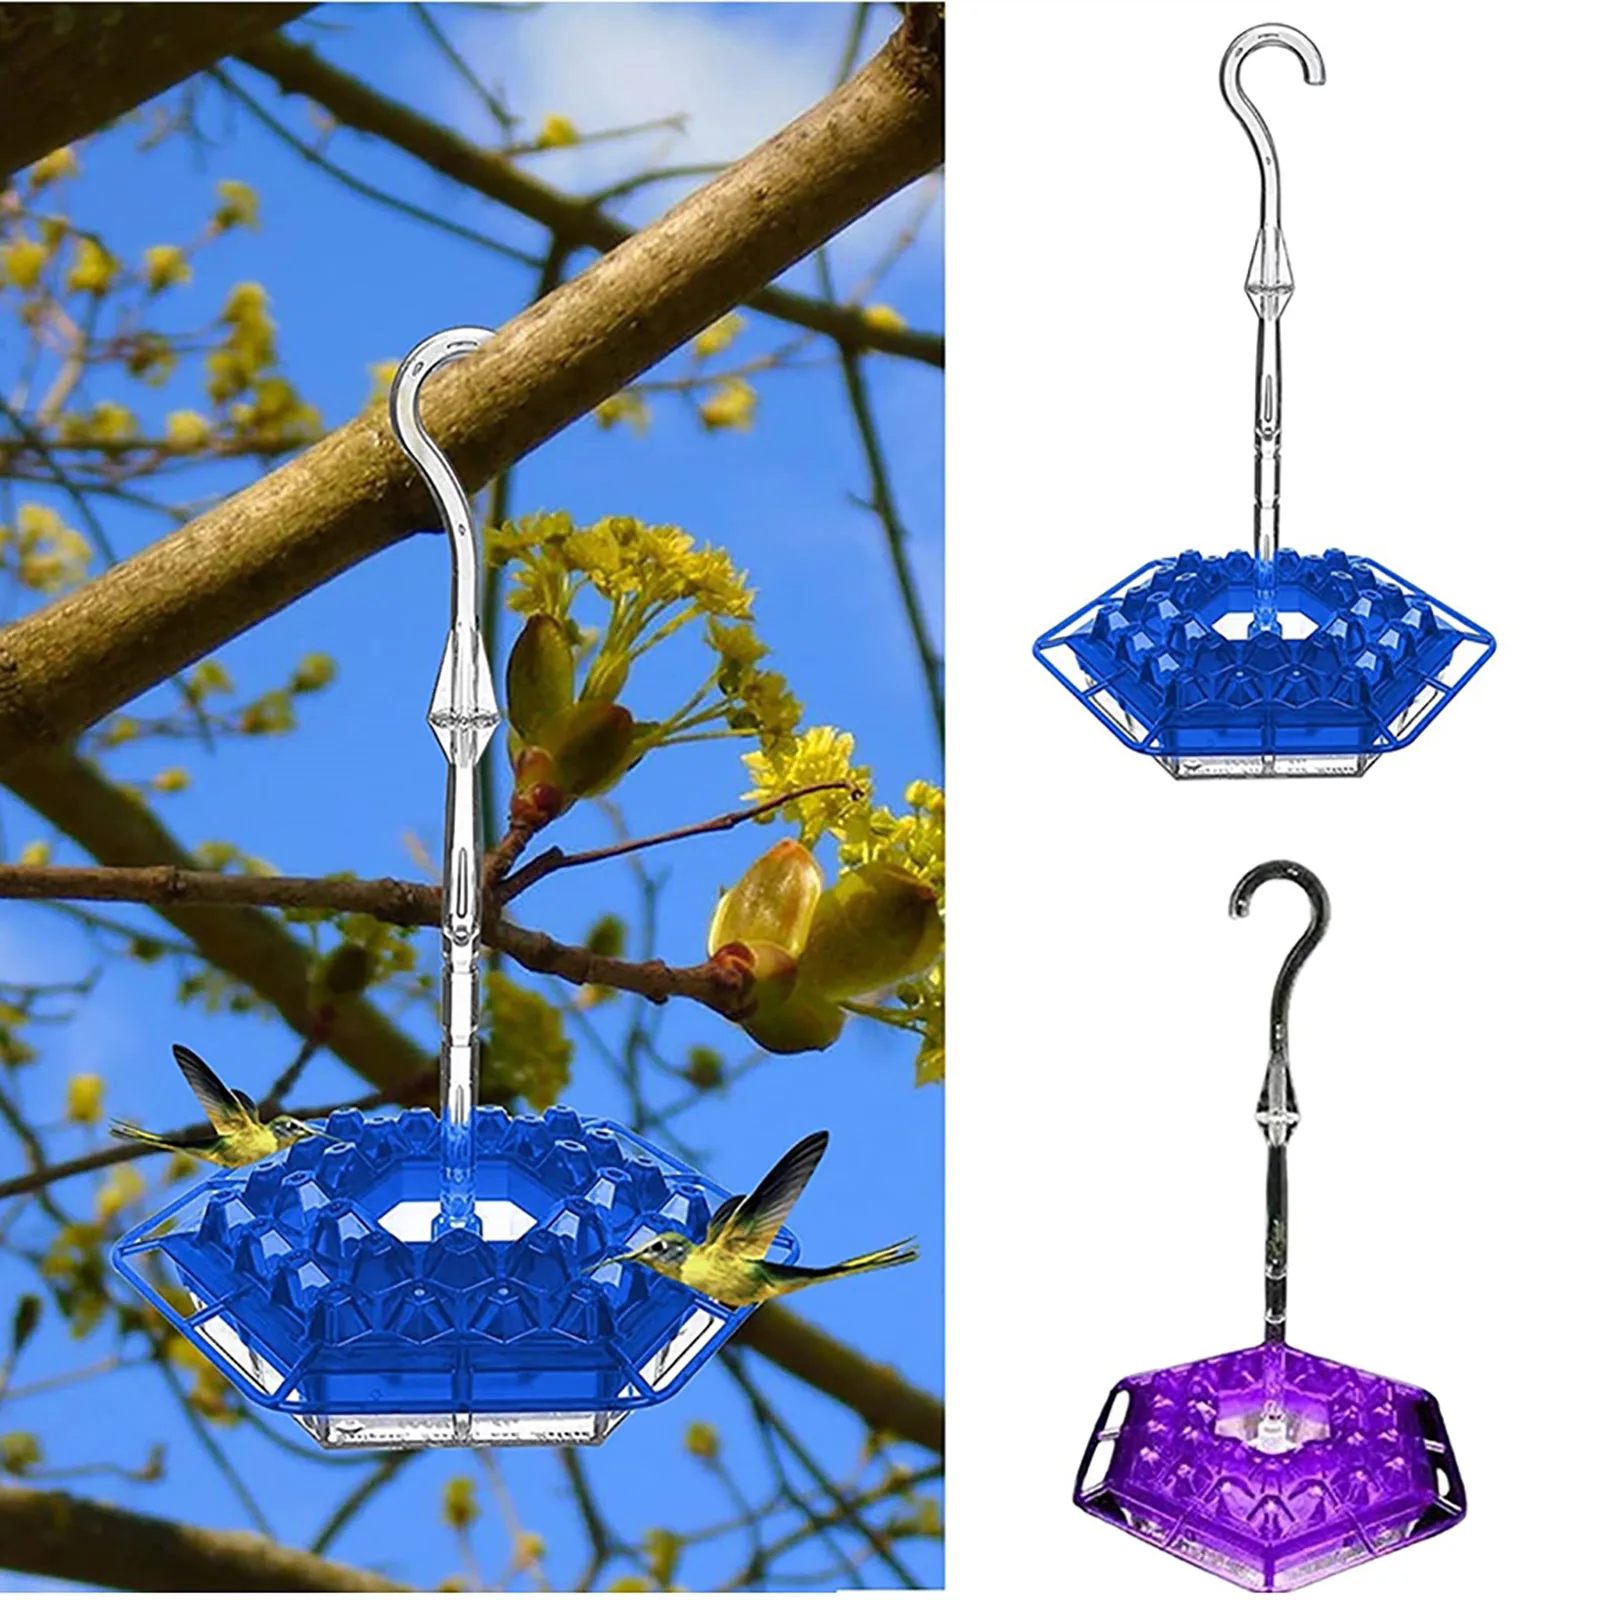 

Hummingbird Feeders for Outdoor Marys Feeder with Perch and Built-In Ant Moat Bird Feeder Pet Bird Supplies Bird Feeder Outdoor